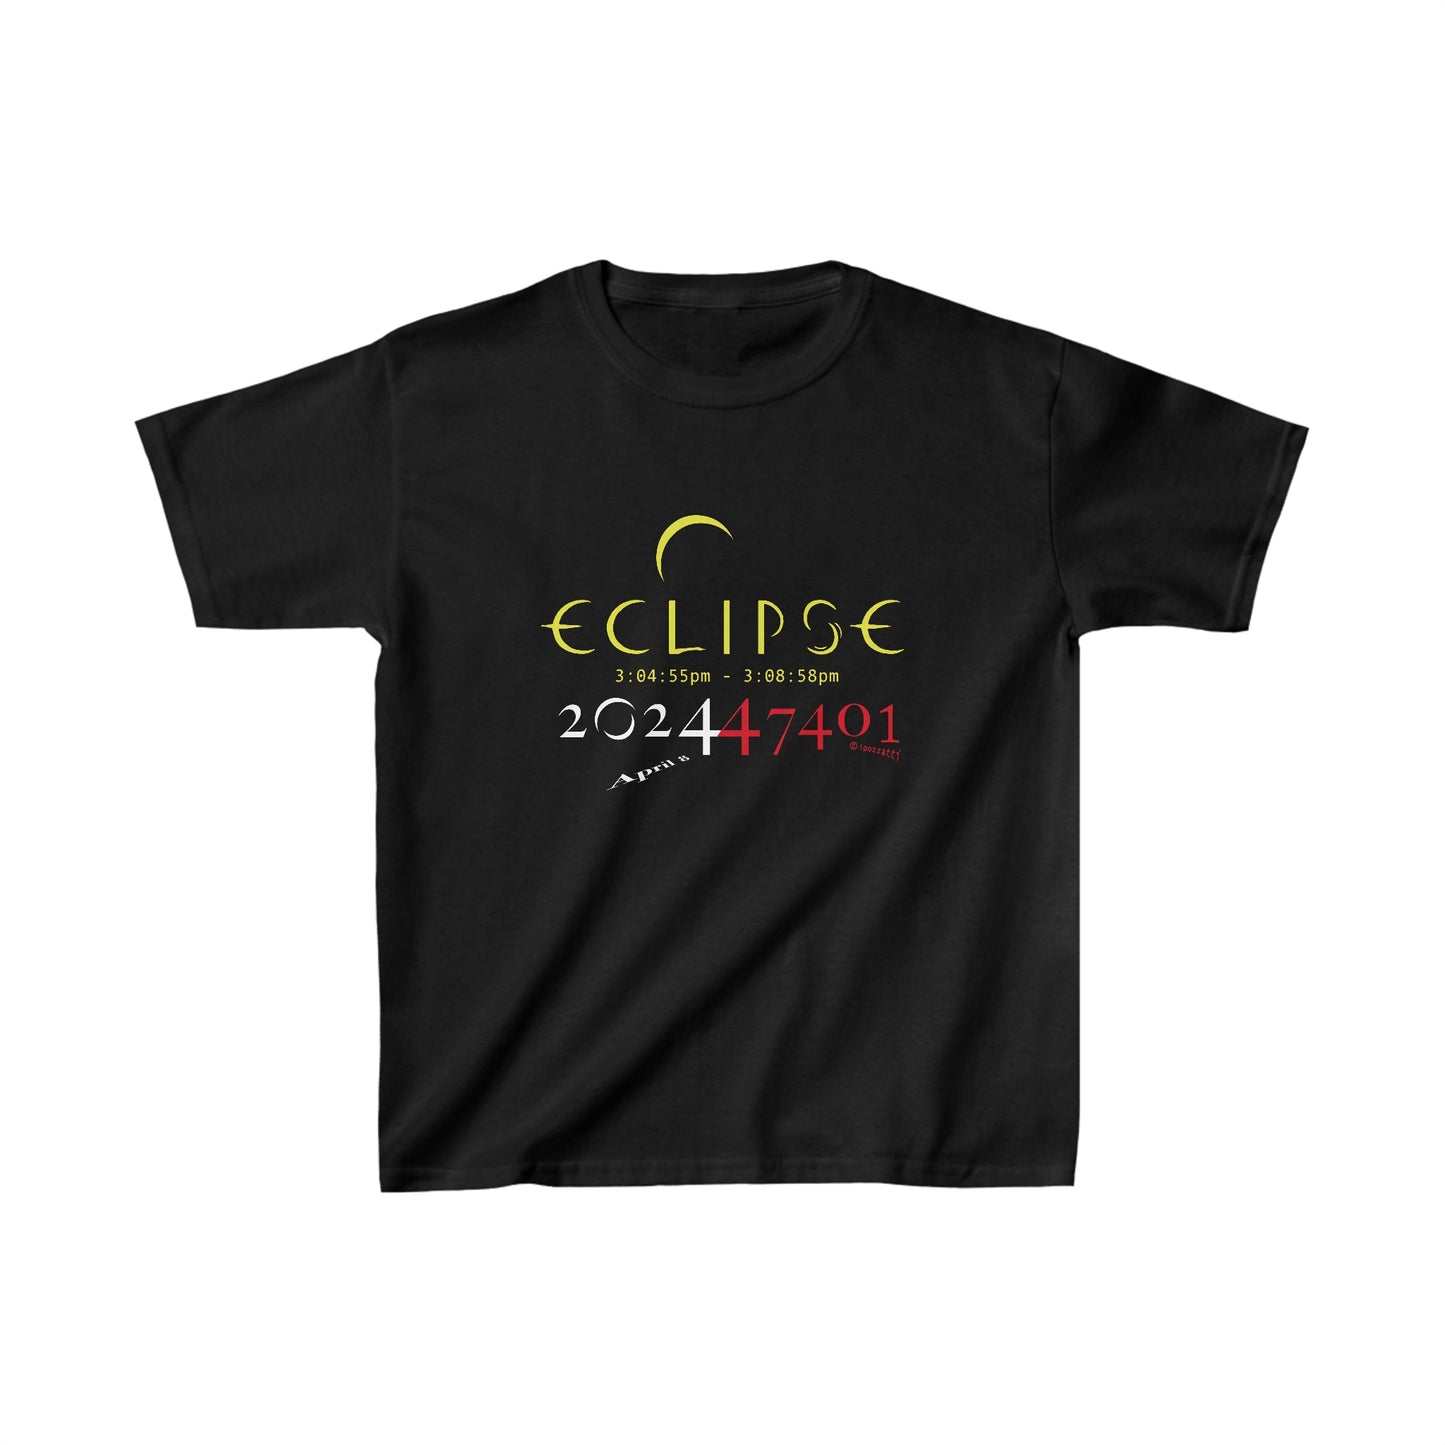 Eclipse Design Youth Tee (Text Only Design)